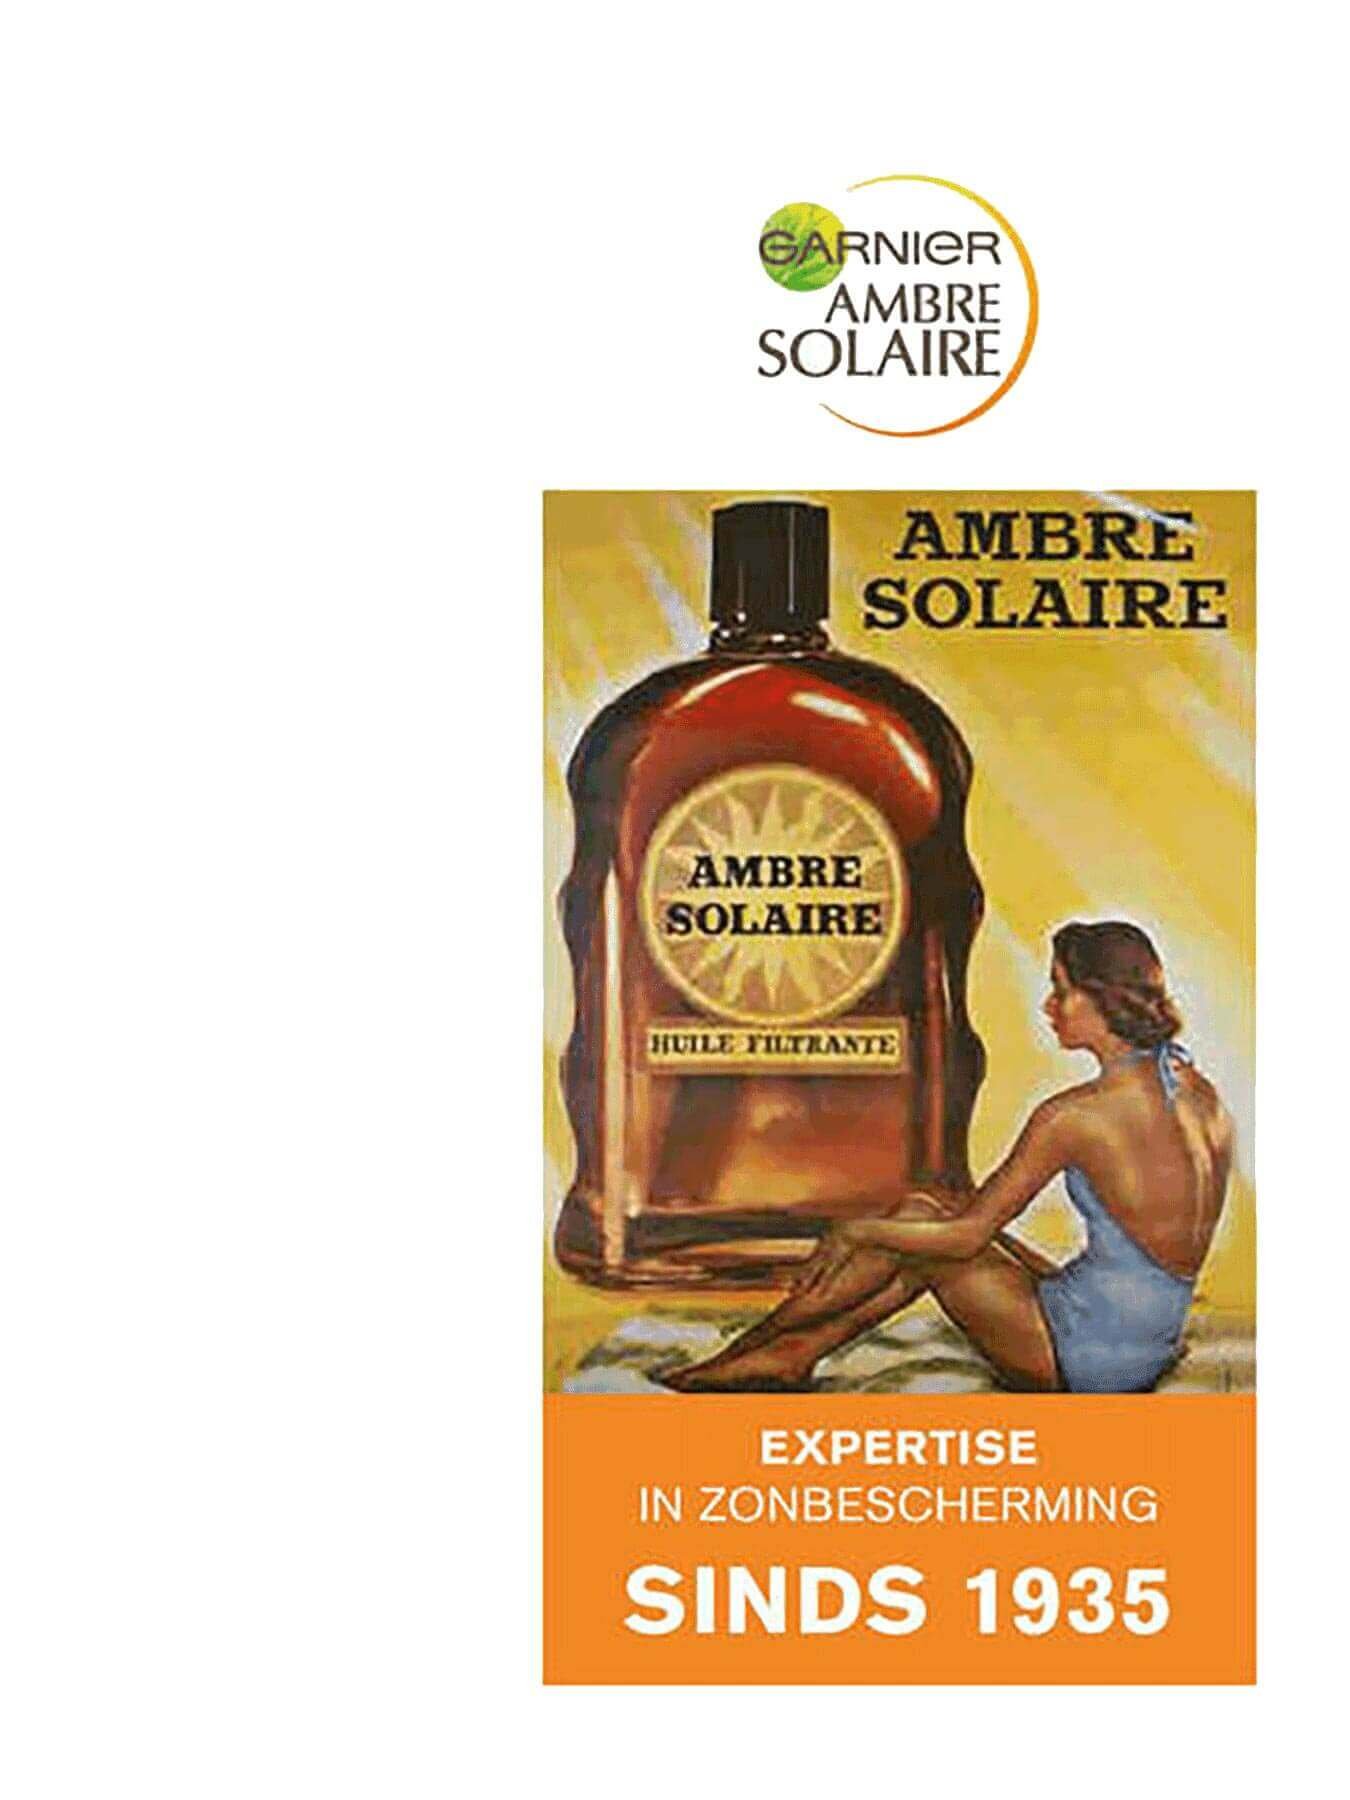 Ambre Solaire expertise in zonbescherming sinds 1935